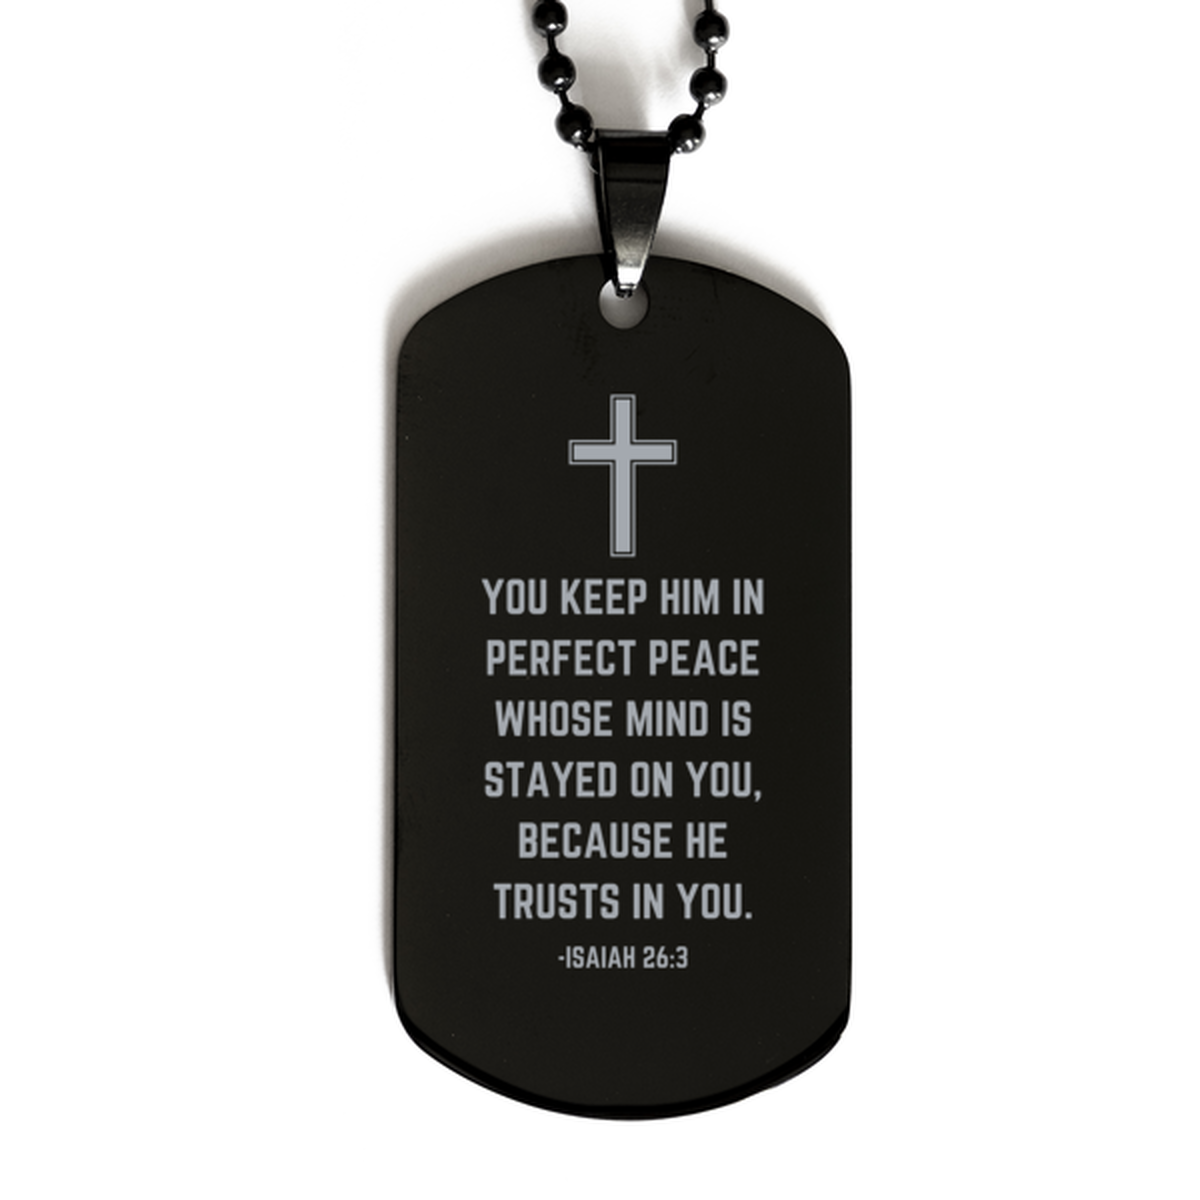 Baptism Gifts For Teenage Boys Girls, Christian Bible Verse Black Dog Tag, You keep him in perfect peace, Confirmation Gifts, Bible Verse Necklace for Son, Godson, Grandson, Nephew